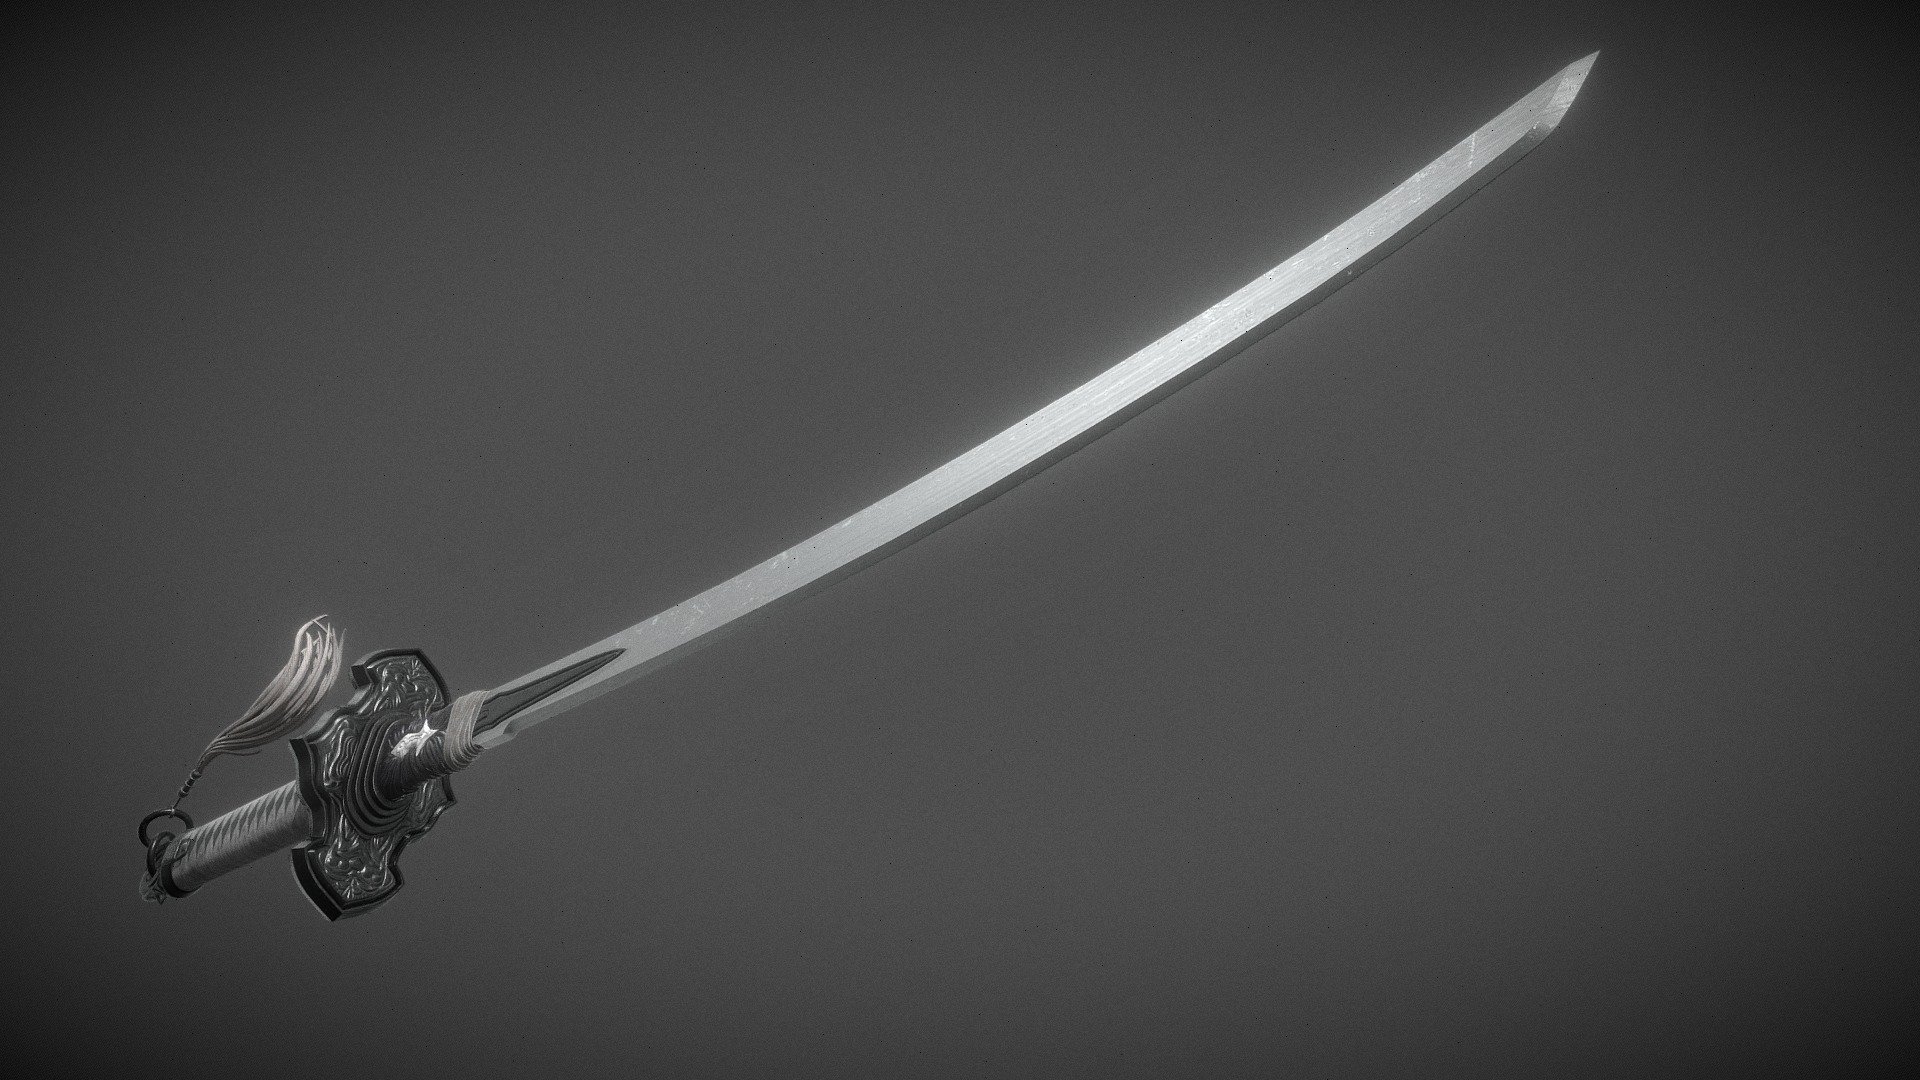 Sculpt in zbrush. Retopo in maya. Texture in substance - Virtuous Contract Katana 2B Sword - 3D model by Flinky 3d model